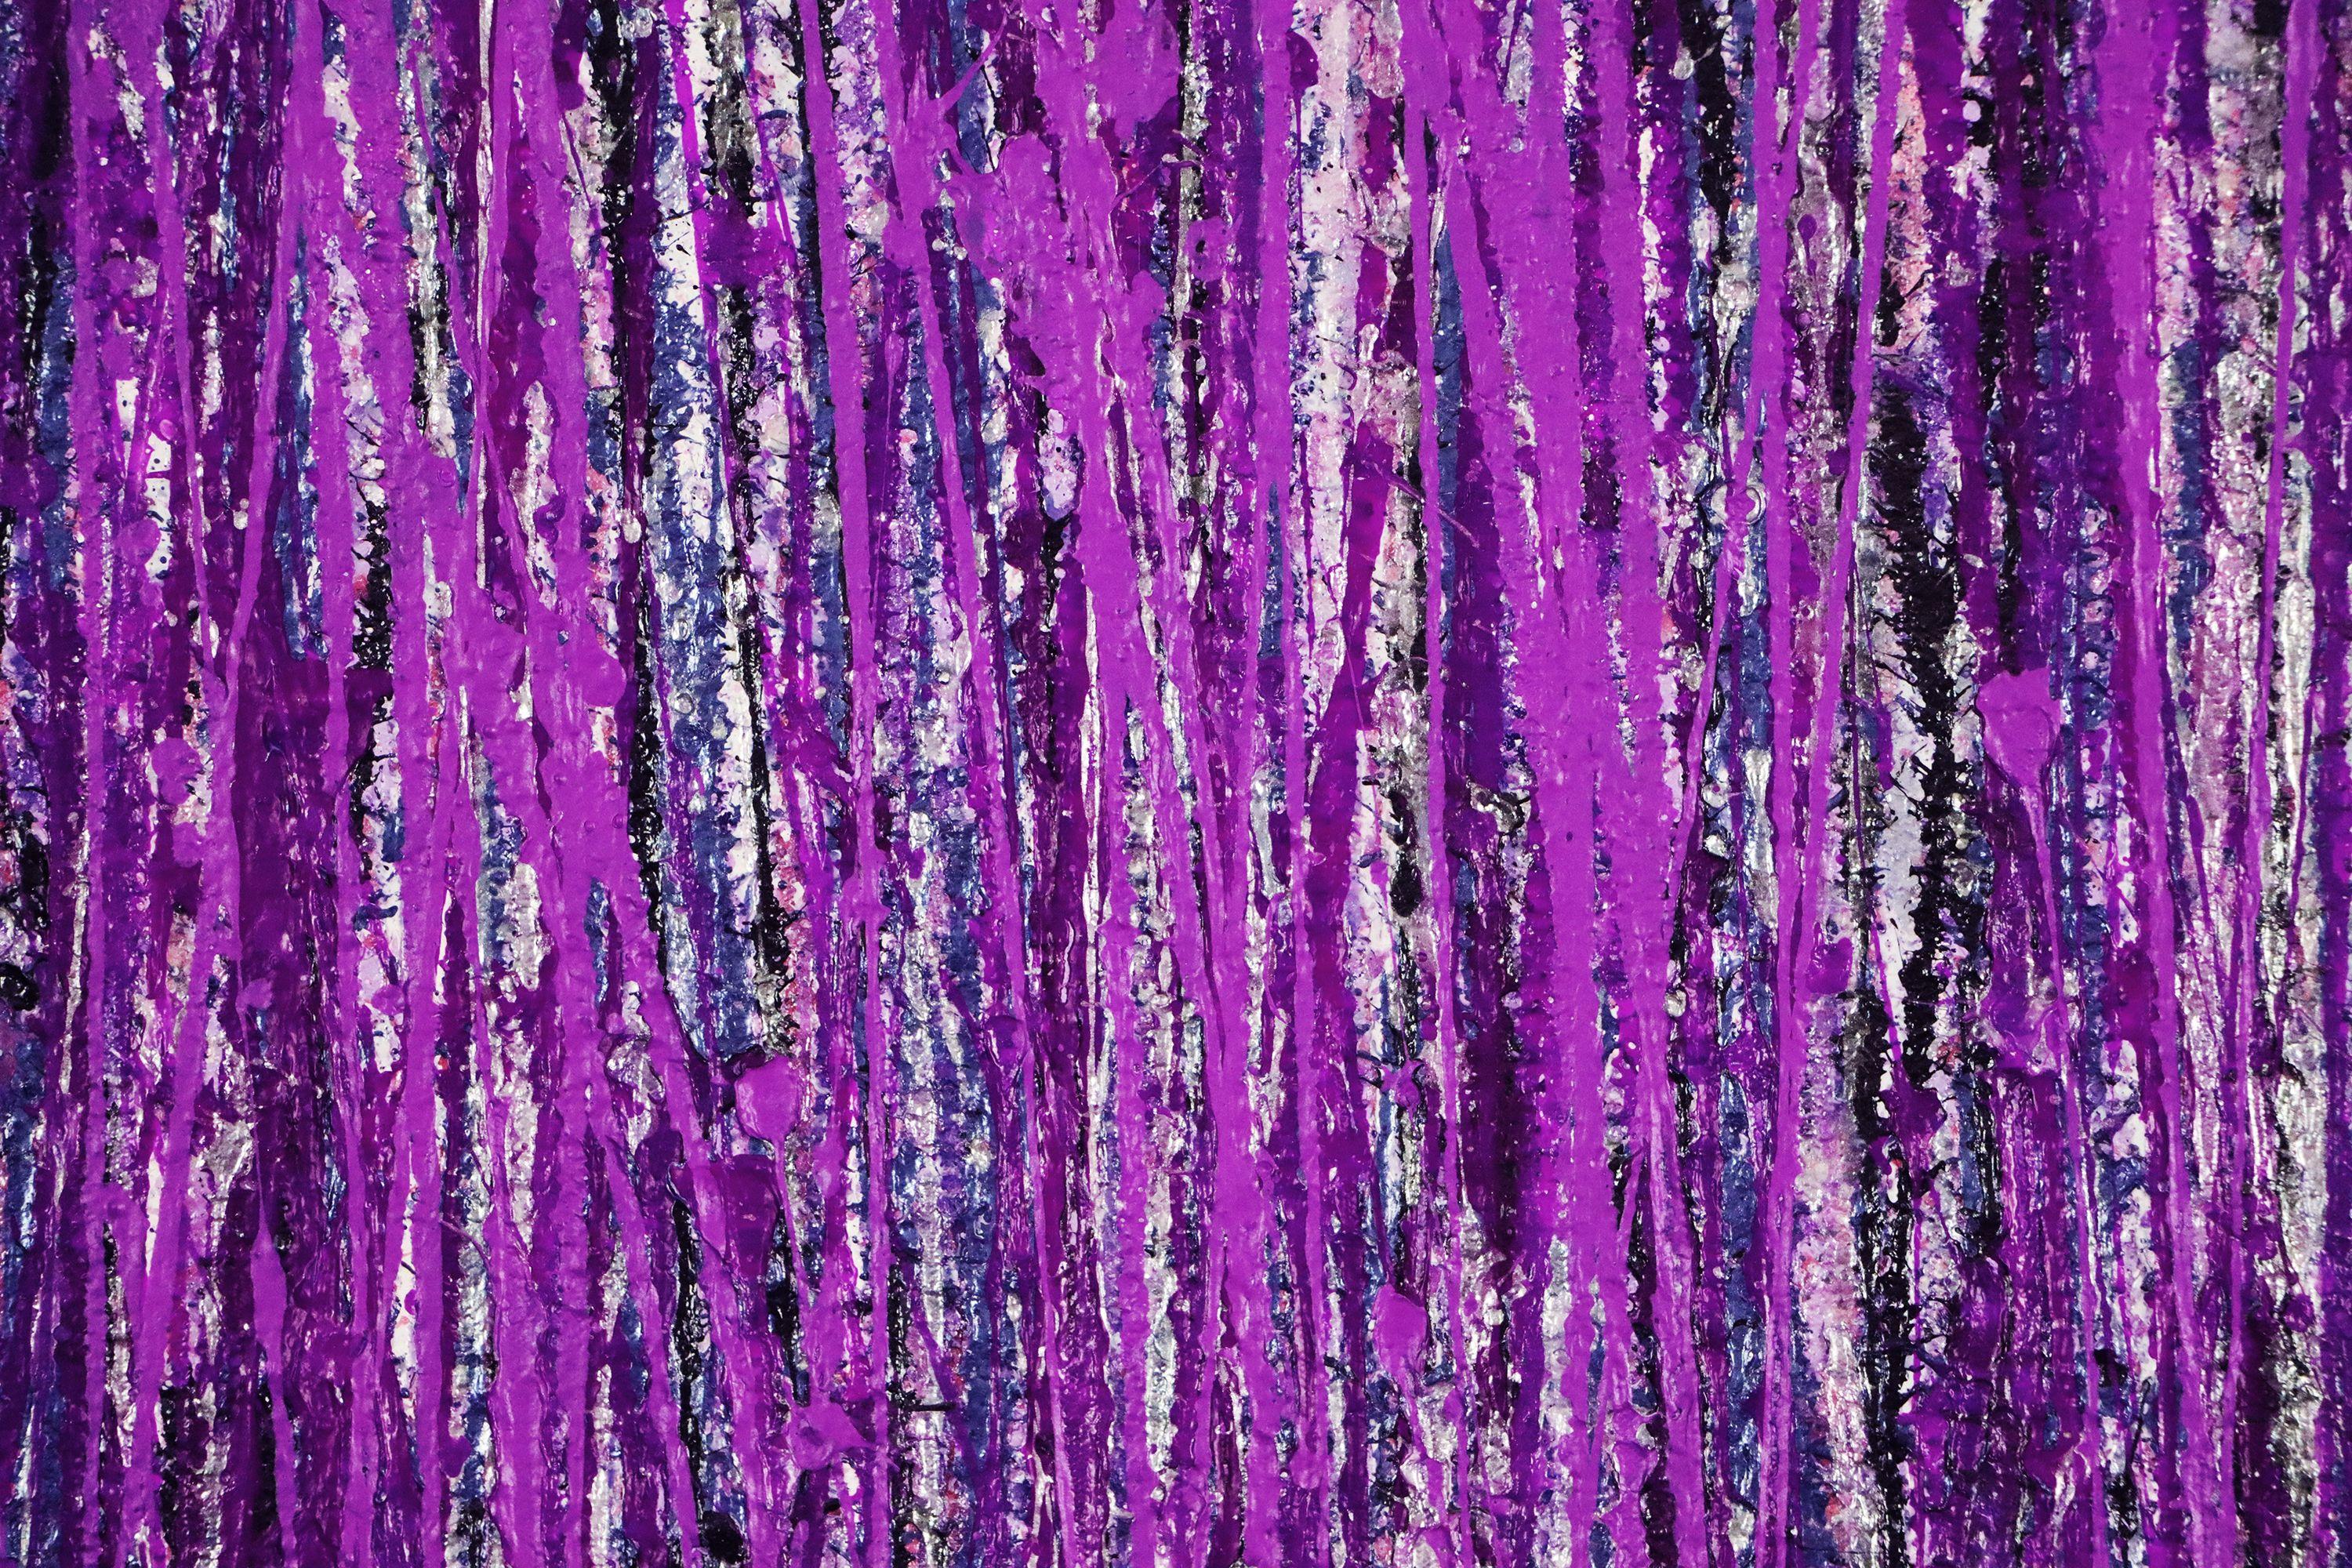 Vibrant expressionistic Inspired by nature and Provence in France. Abstract and intuitive, shades of purple from muted to bright glossy Violet with dark metallic details in dark green, black, iridescent silver and some pink. This artwork arrives in